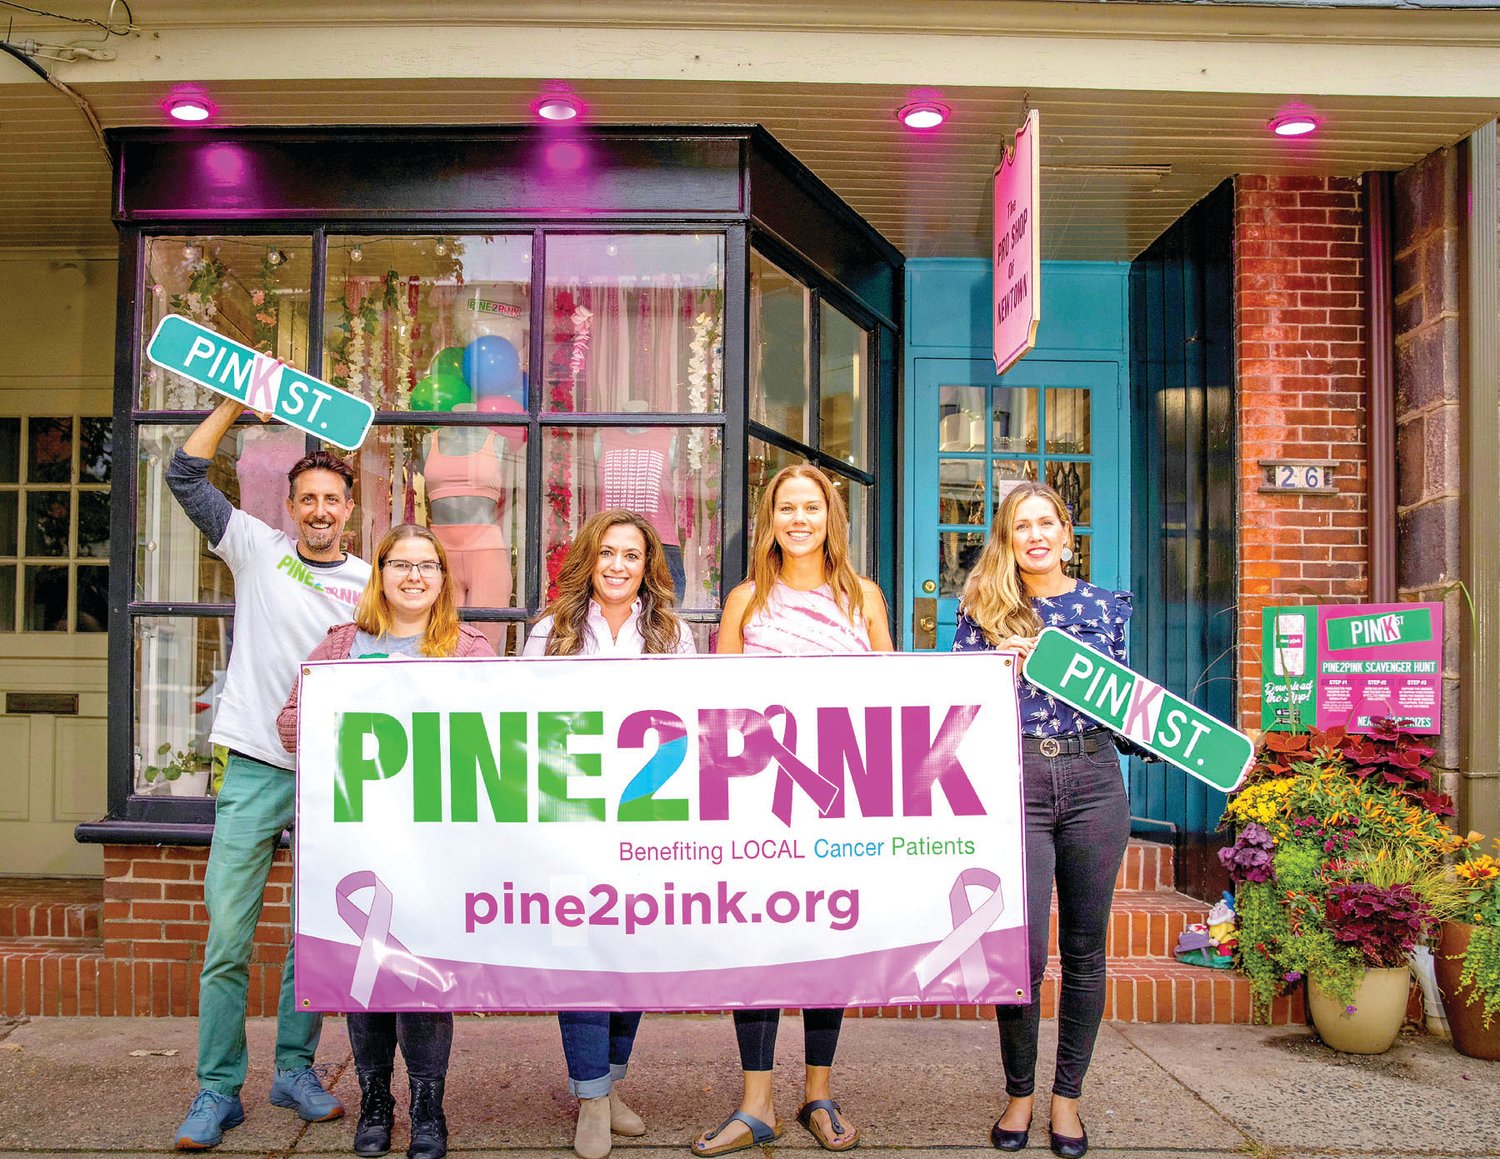 From left are: Keith Fenimore, founder Pine2Pink; Brittany Brown, social influencer; Gina-Maria Santoro, owner, Giovanni’s Fine Fashions; Kathleen McCafferty, owner, The Pro Shop of Newtown; and Nicole Rodowicz, Newtown Borough Council member.